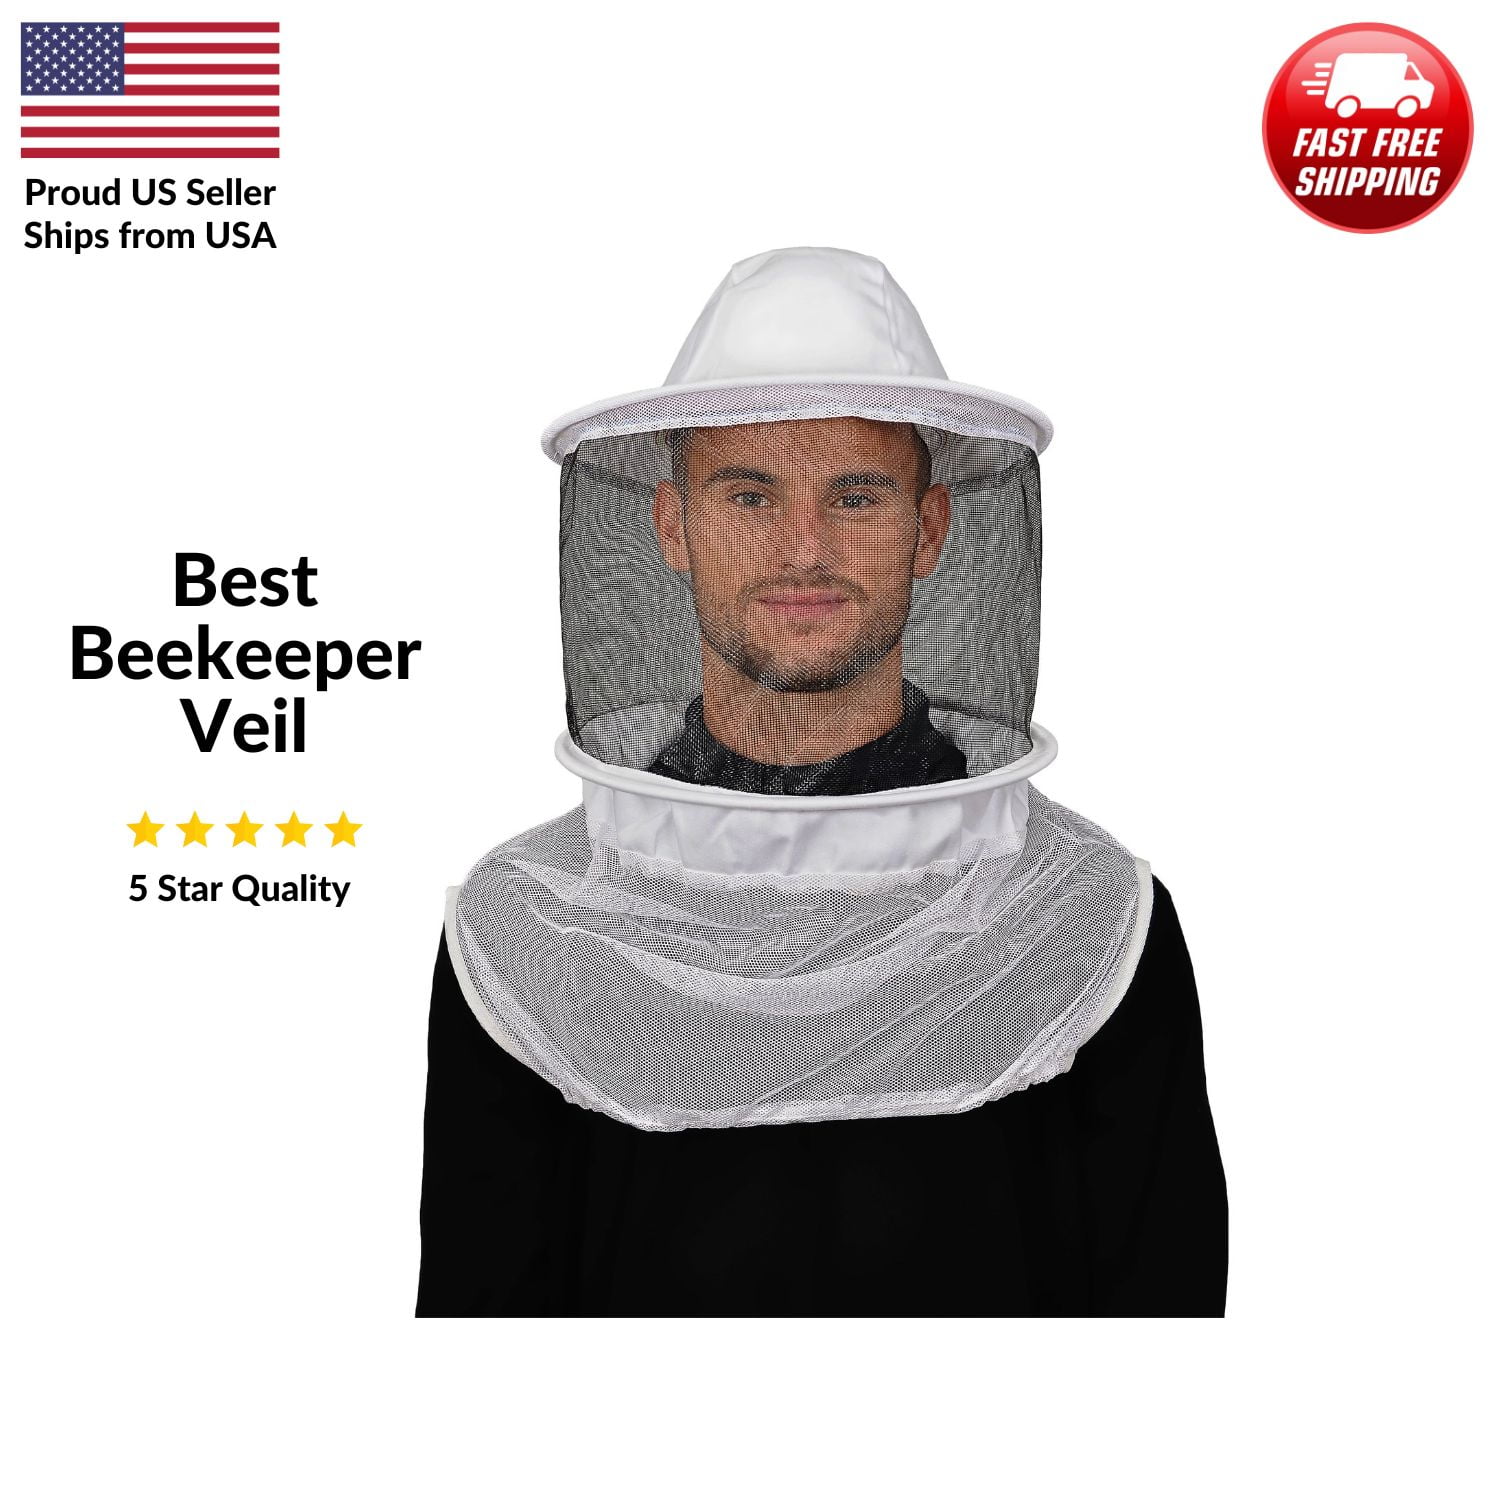 Beekeeping Veil with Hat one piece construction quick grab & go 